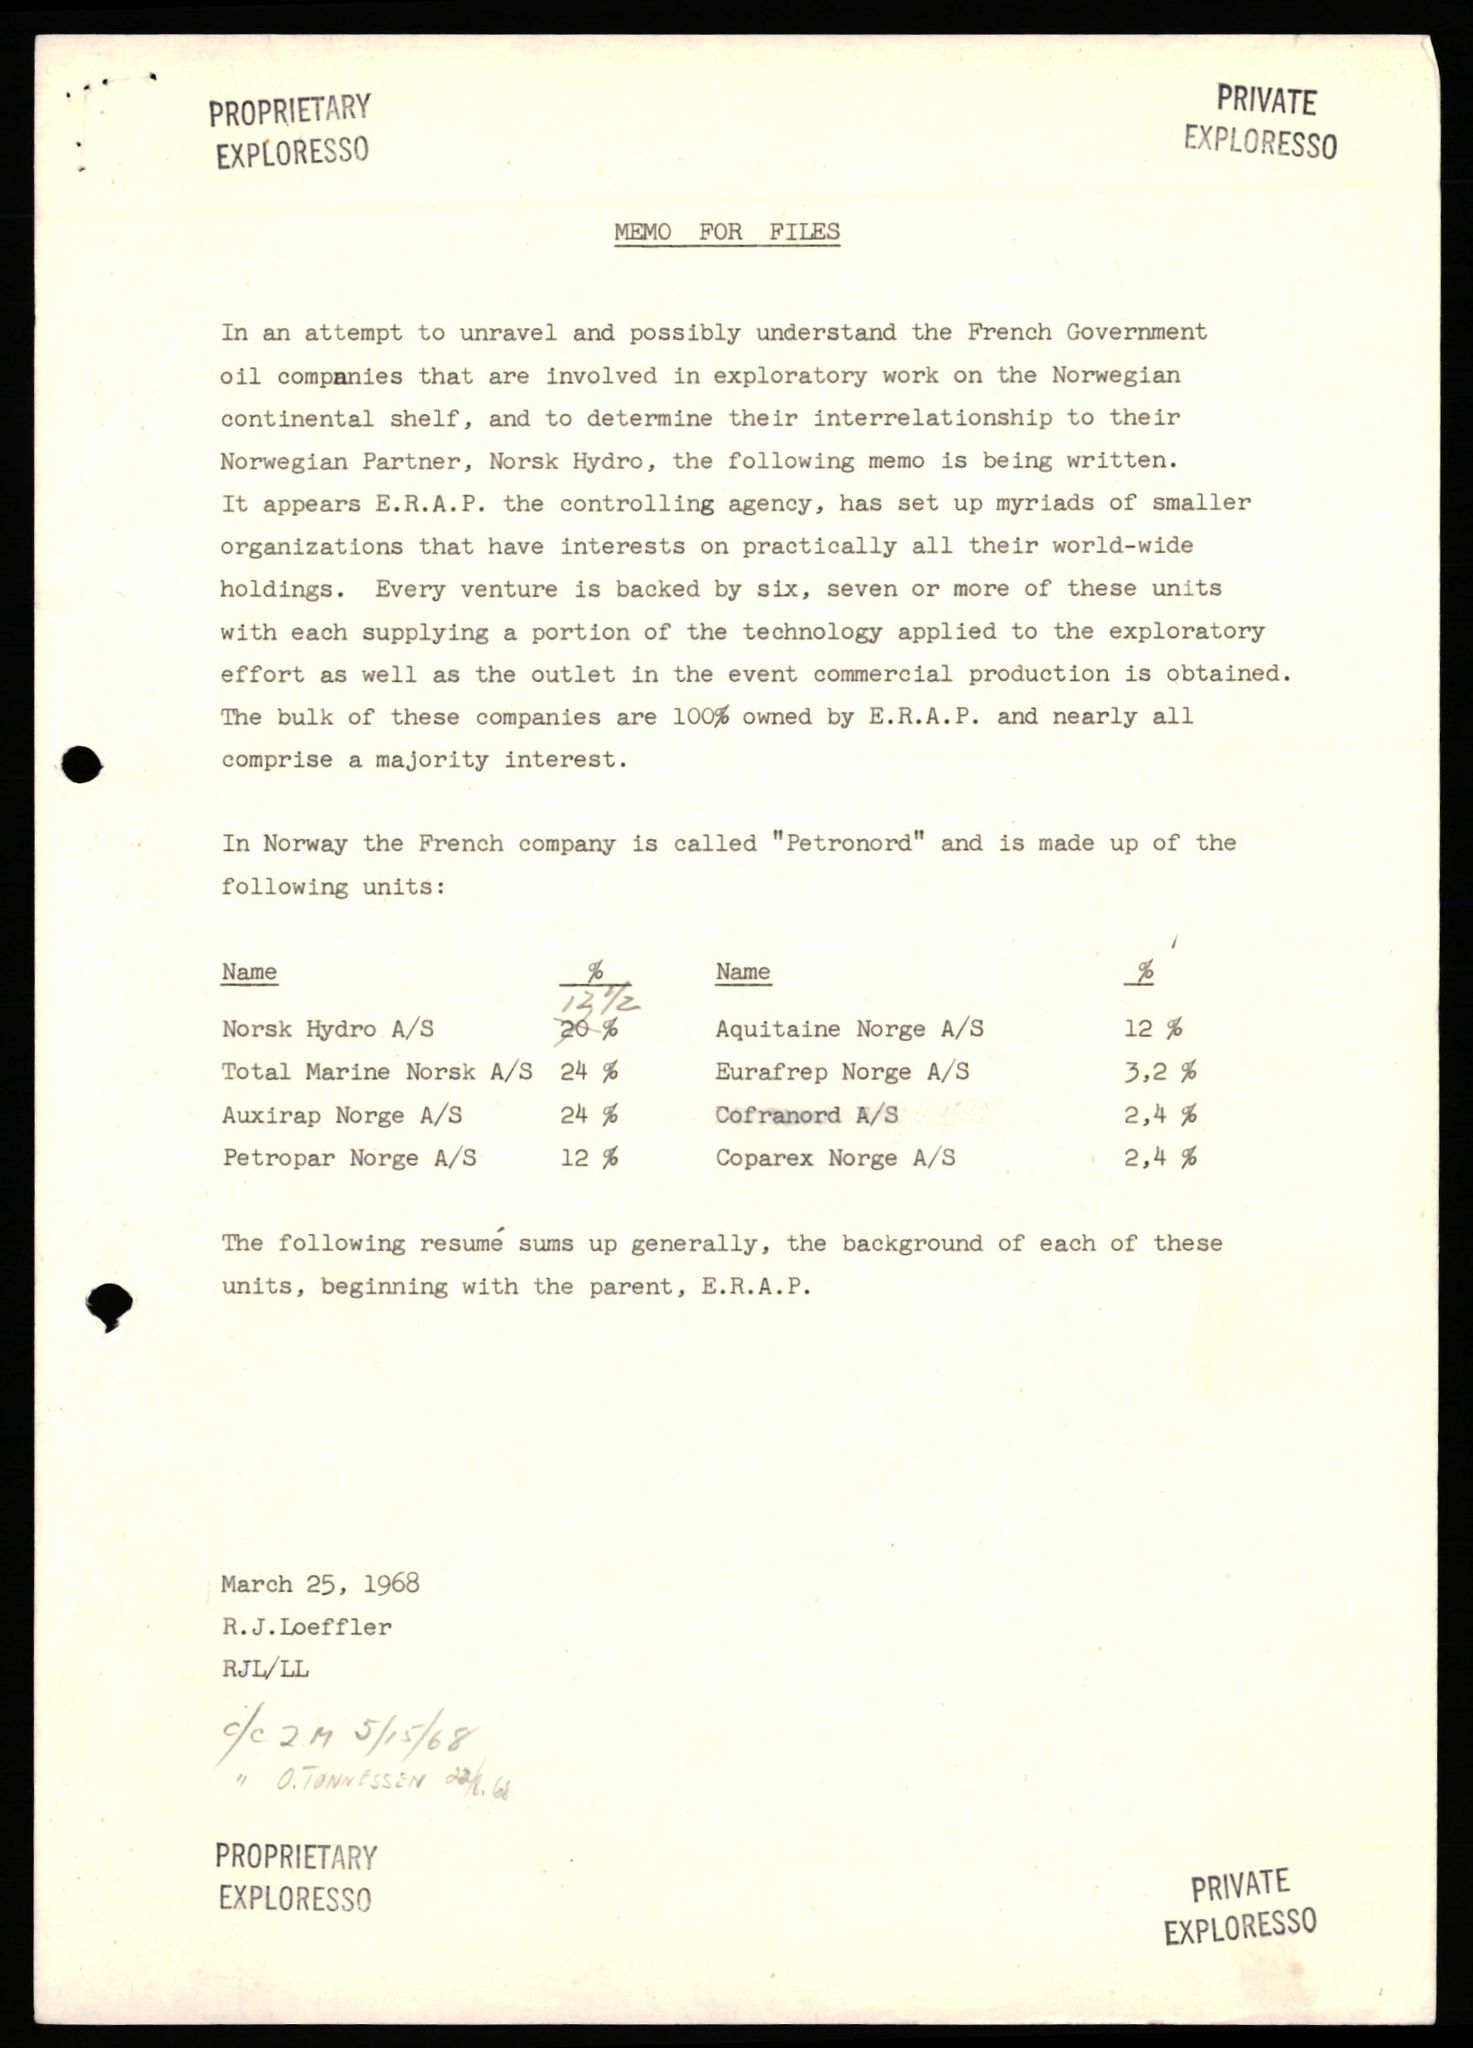 Pa 1512 - Esso Exploration and Production Norway Inc., SAST/A-101917/E/Ea/L0517: Early license correspondence, 1968-1974, p. 1